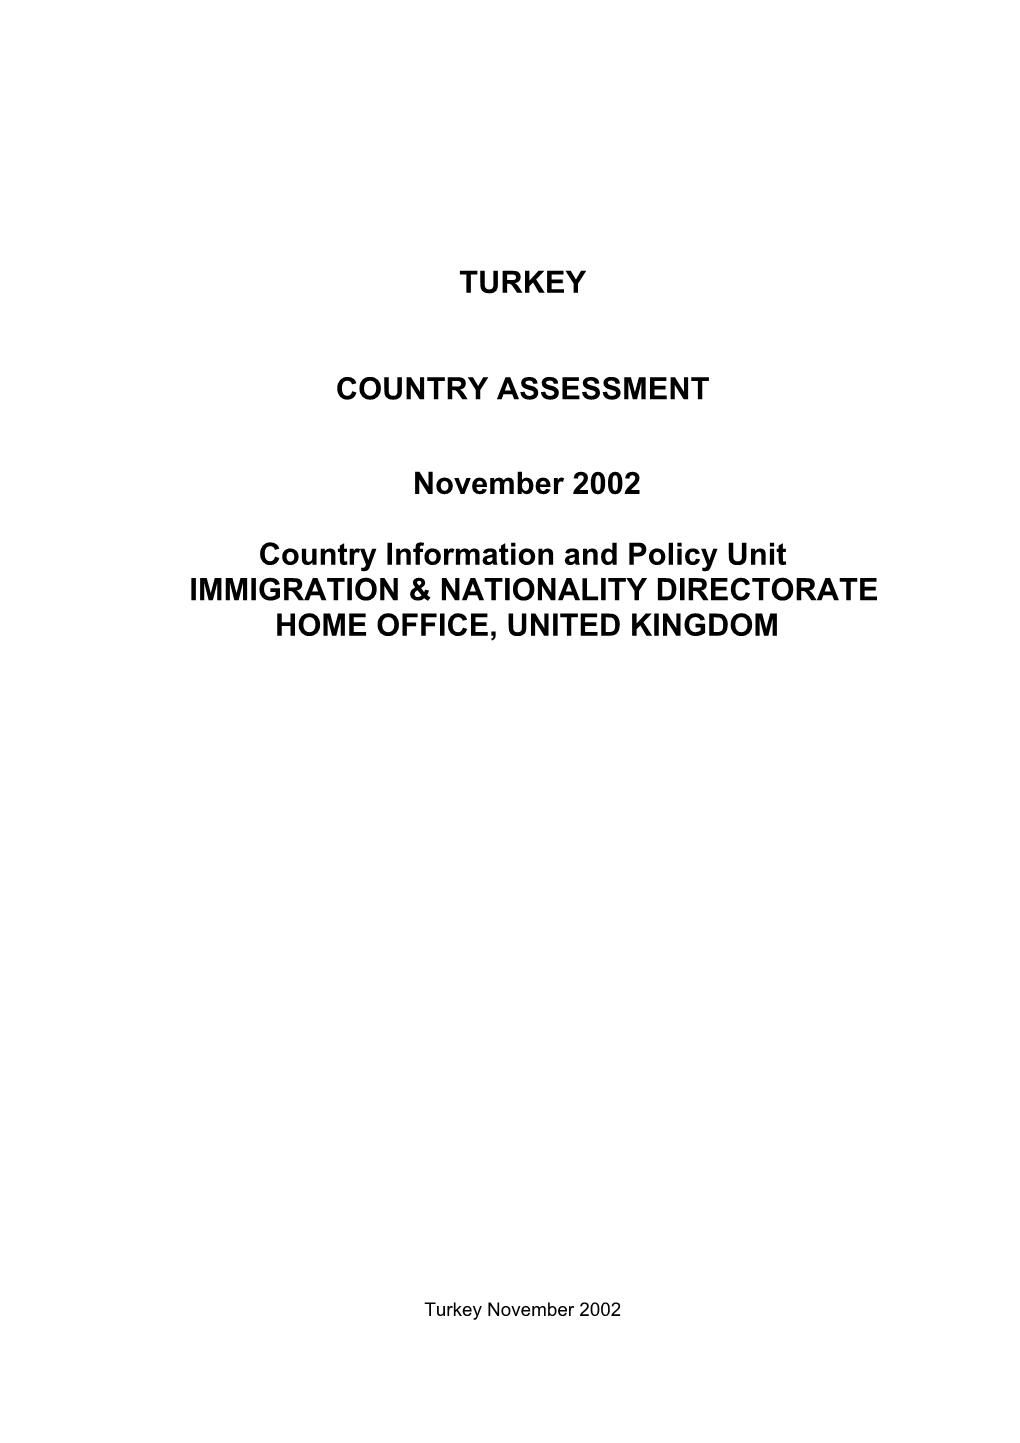 Turkey Country Assessment